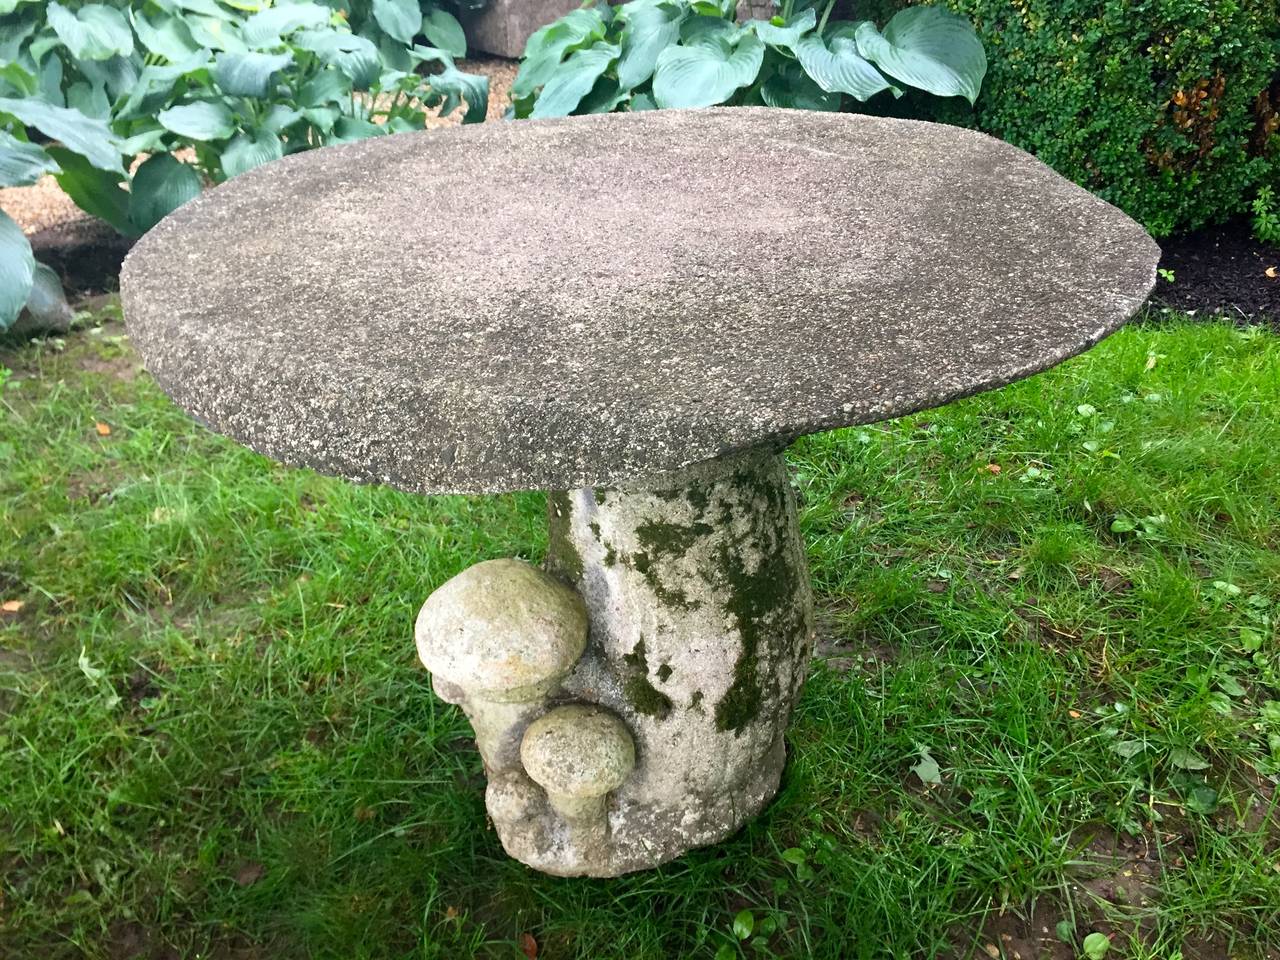 This set is really amazing and all original! Made of cast stone, the realistic table is loaded with lichen and moss, features a cluster of small toadstools on the base, and has downward-curving edges. The four matching stools are each a little